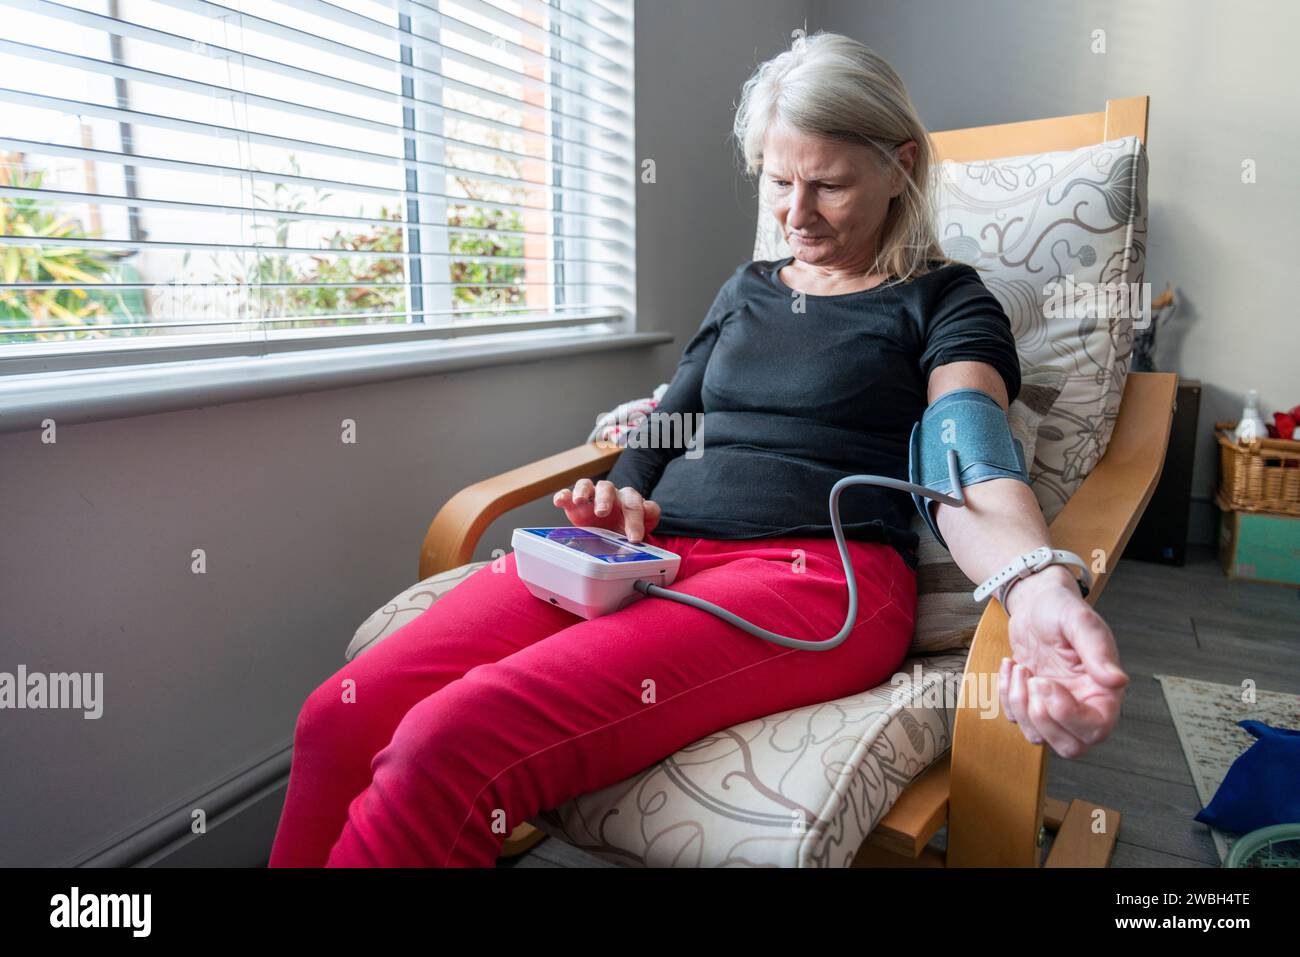 A health conscious female,sits in an armchair,in her house,using a blood pressure monitor to self-check her general physical condition,part of her hea Stock Photo